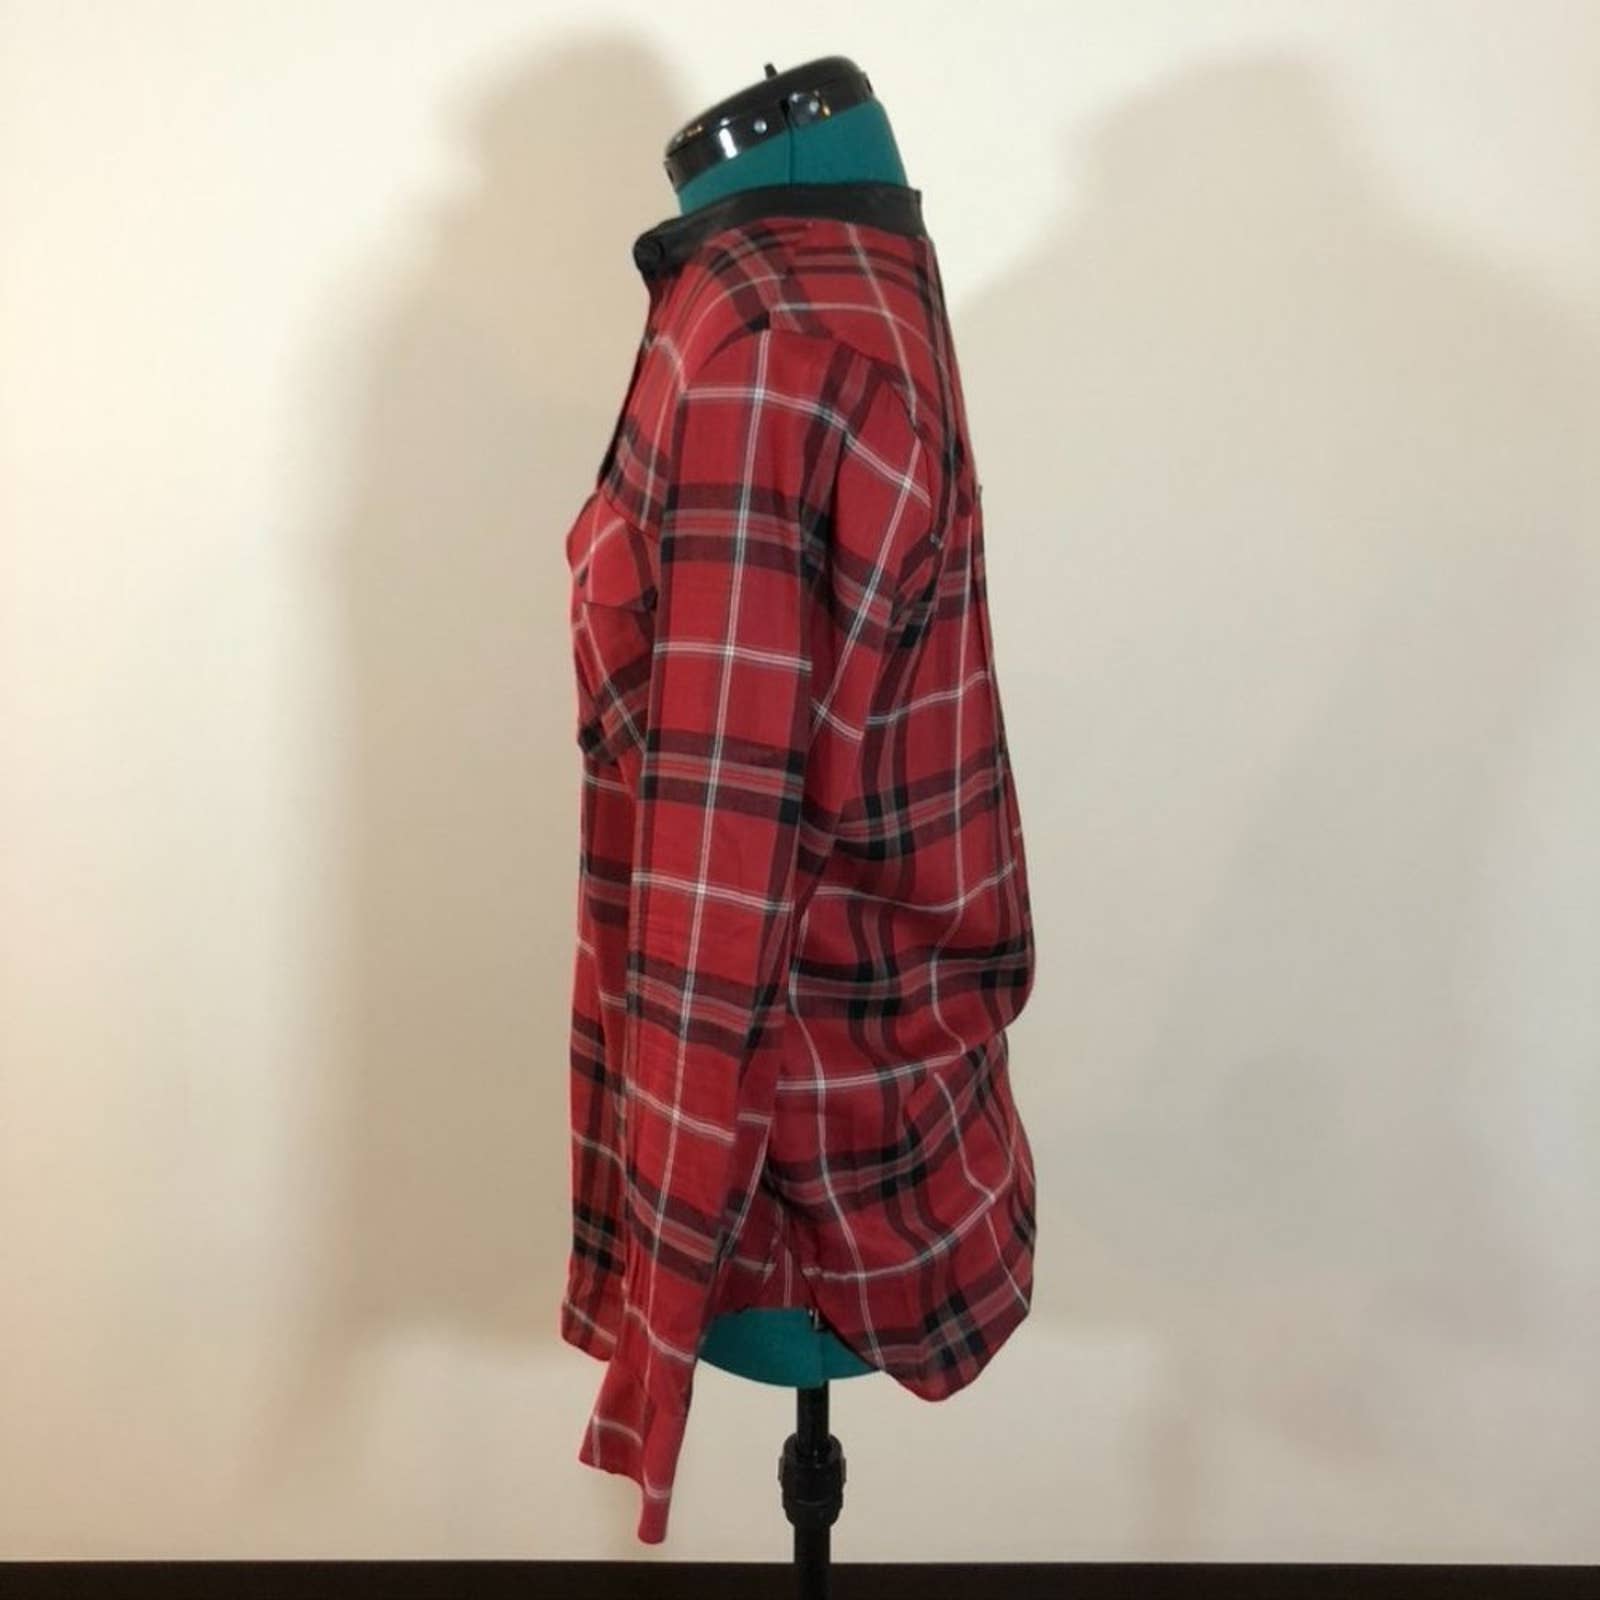 Vince Red Plaid Blouse with Leather Trim - Size 6Markita's ClosetVince